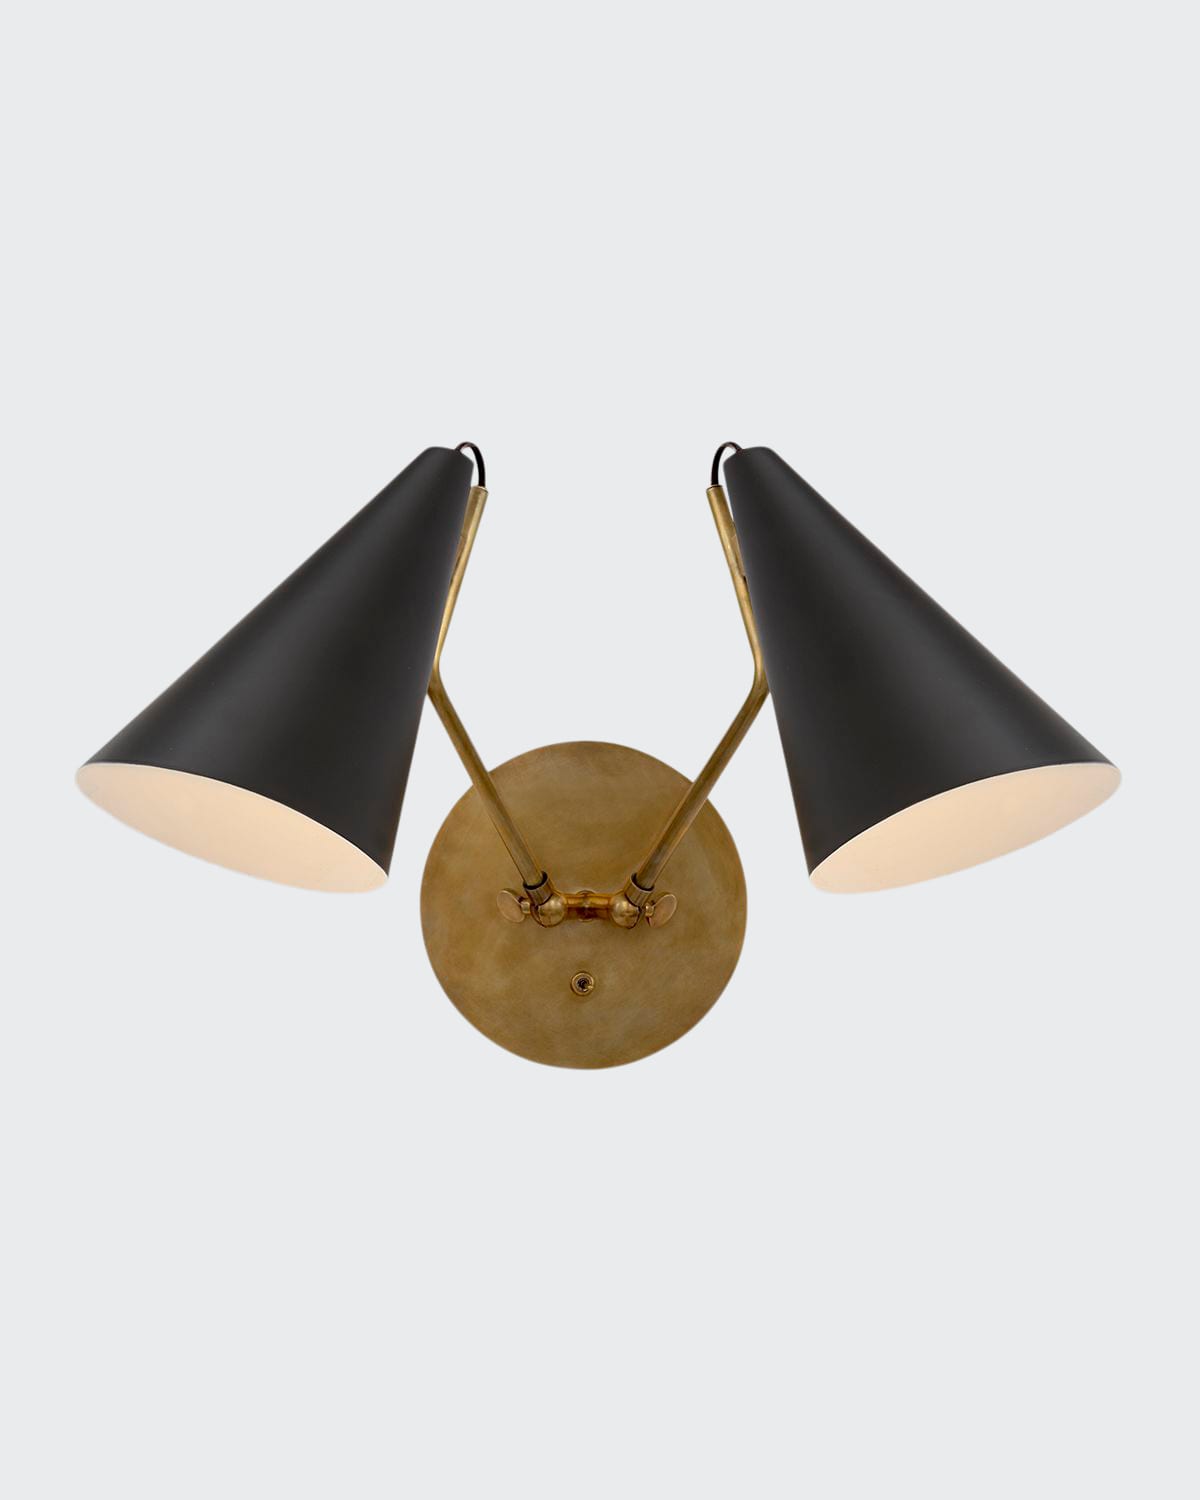 Aerin Clemente Double Sconce In Black And Gold